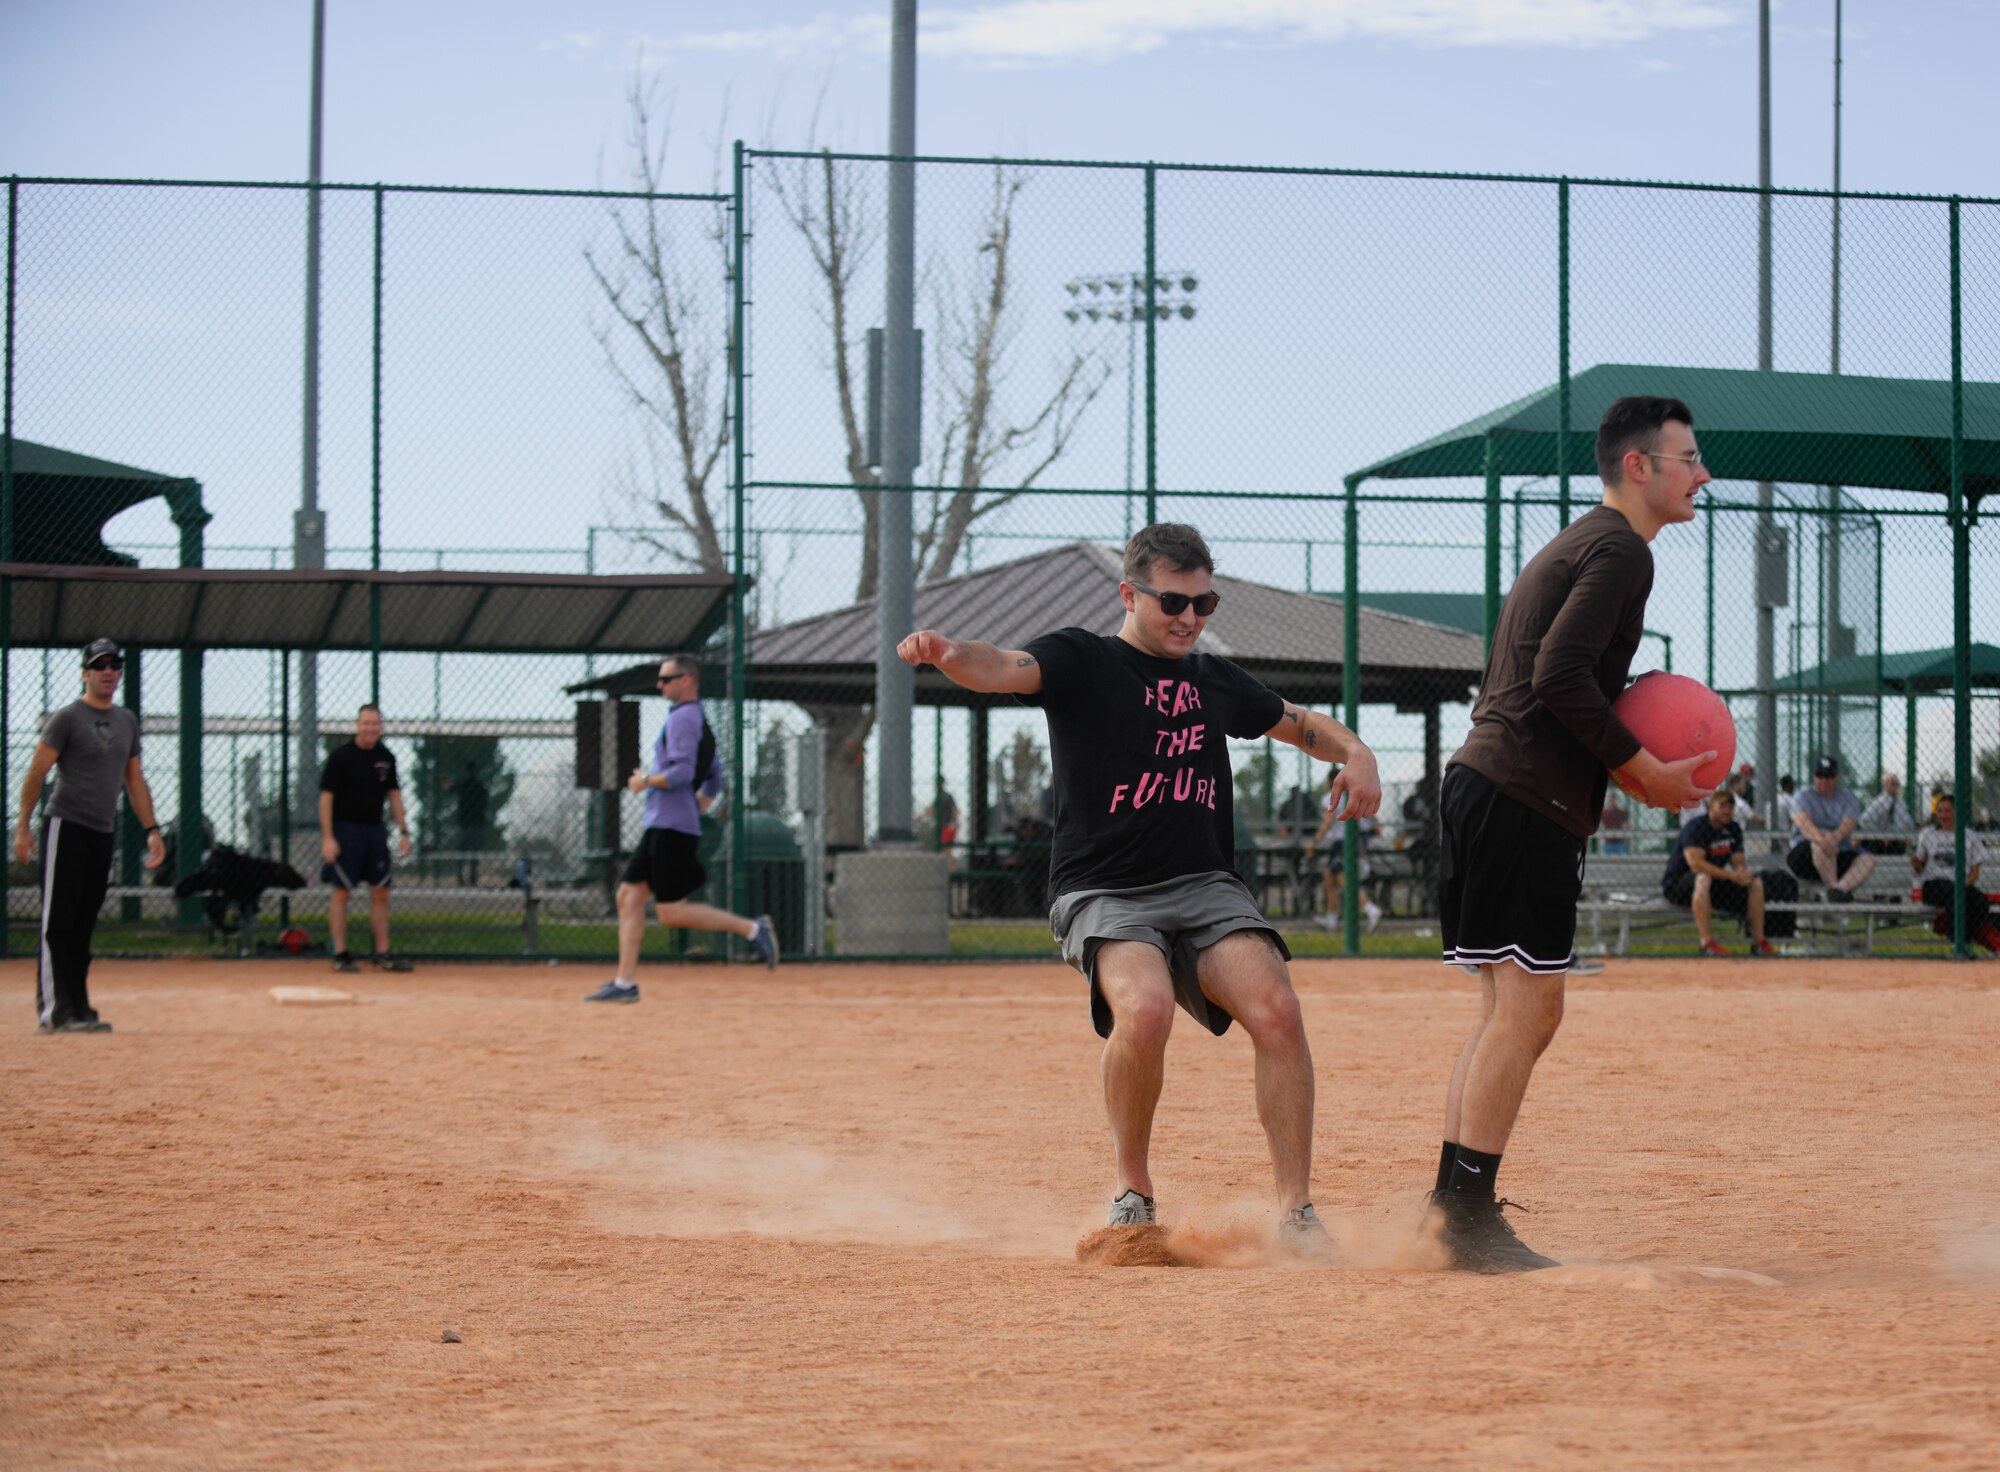 Staff Sgt. Reed Erickson, 460th Comptroller Squadron financial operations supervisor, slides into second base at the softball fields on Buckley Air Force Base, Colo.